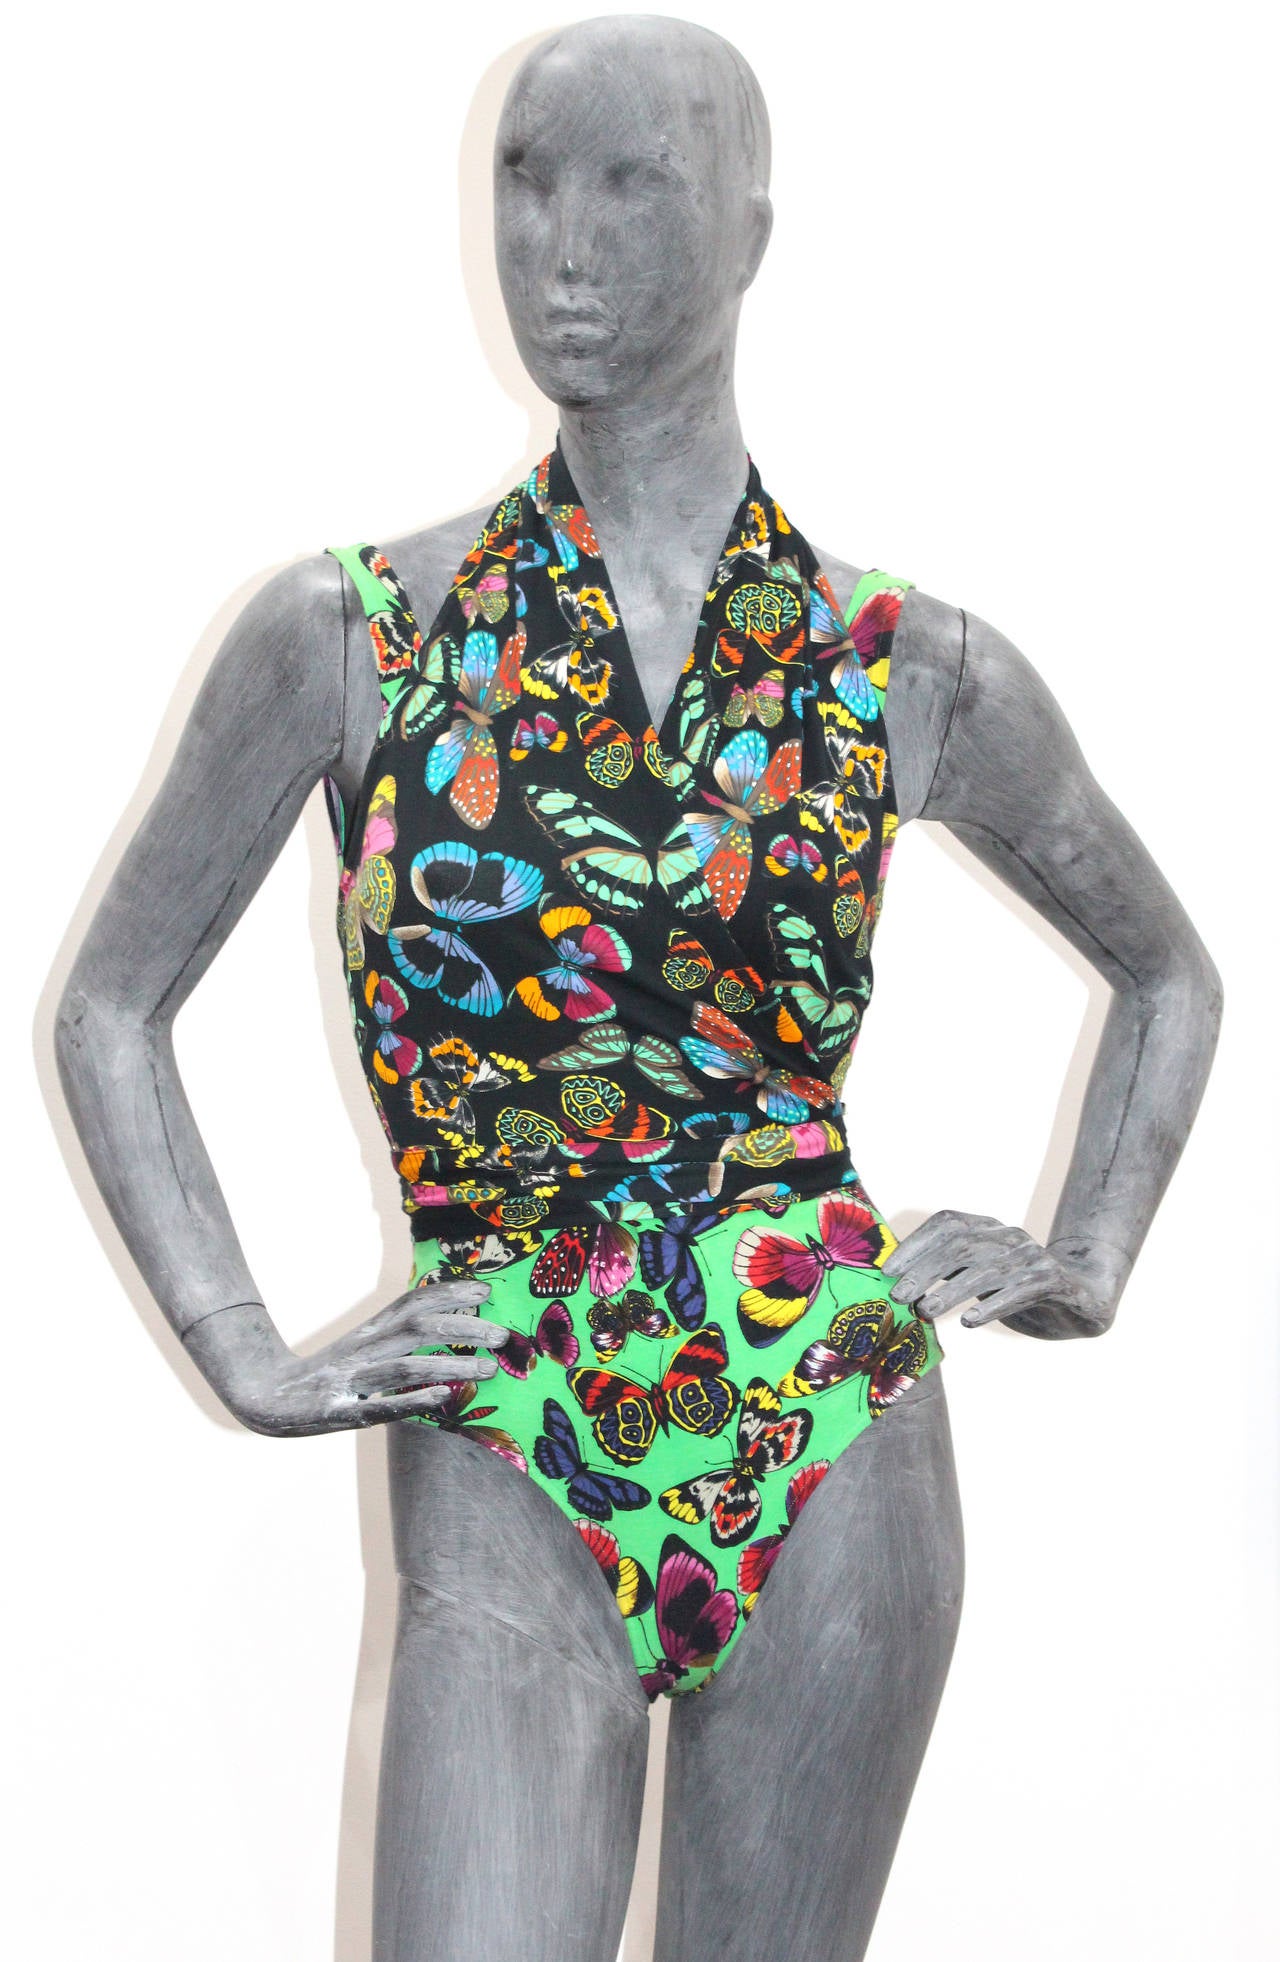 A beautiful and fun bodysuit and halter neck wrap top ensemble by Kenzo Paris designed in the 1990s. The ensemble includes a halter neck wrap top and leotard with scoop neck and low back. The ensemble would work as a bathing suit at the pool party